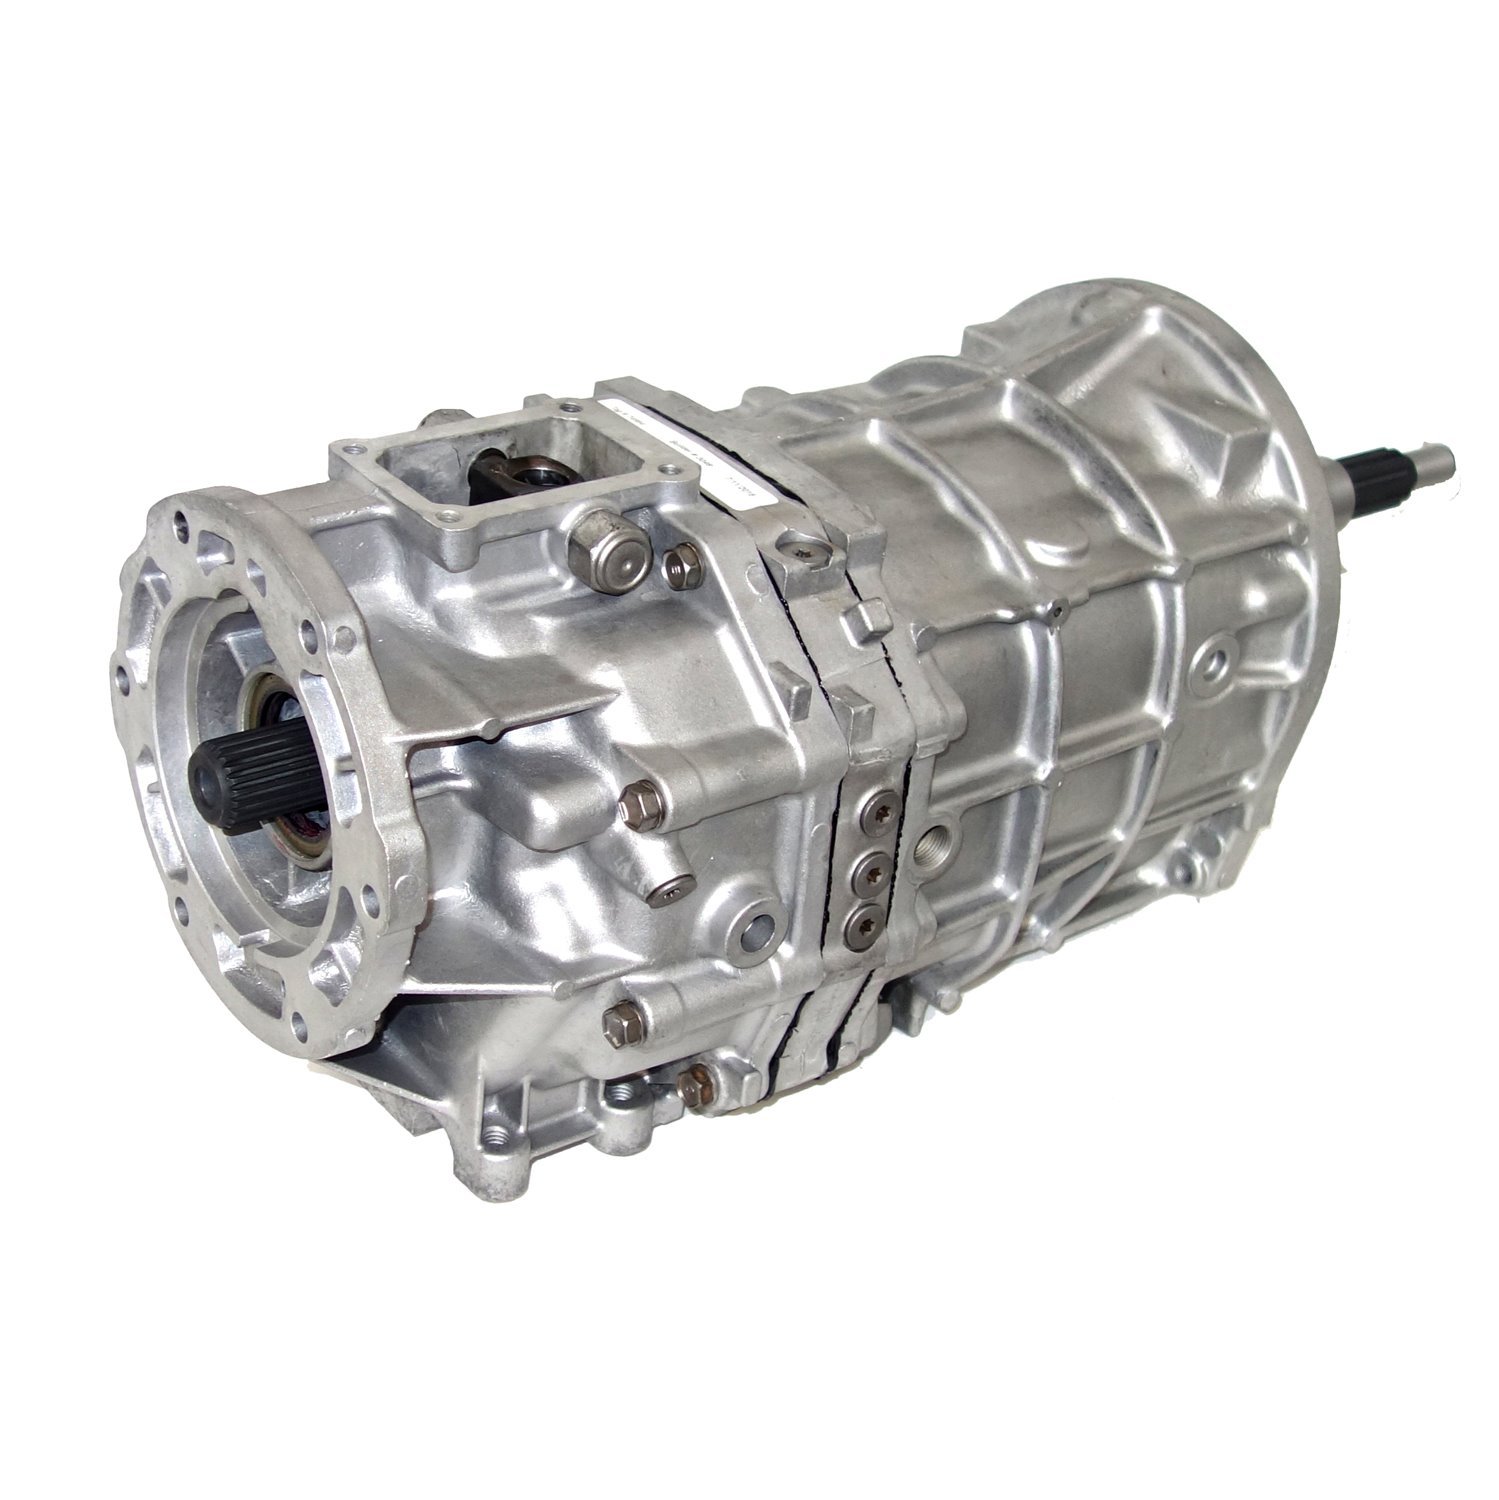 Remanufactured AX15 Manual Transmission for Jeep 89-91 Wrangler, 5 Speed